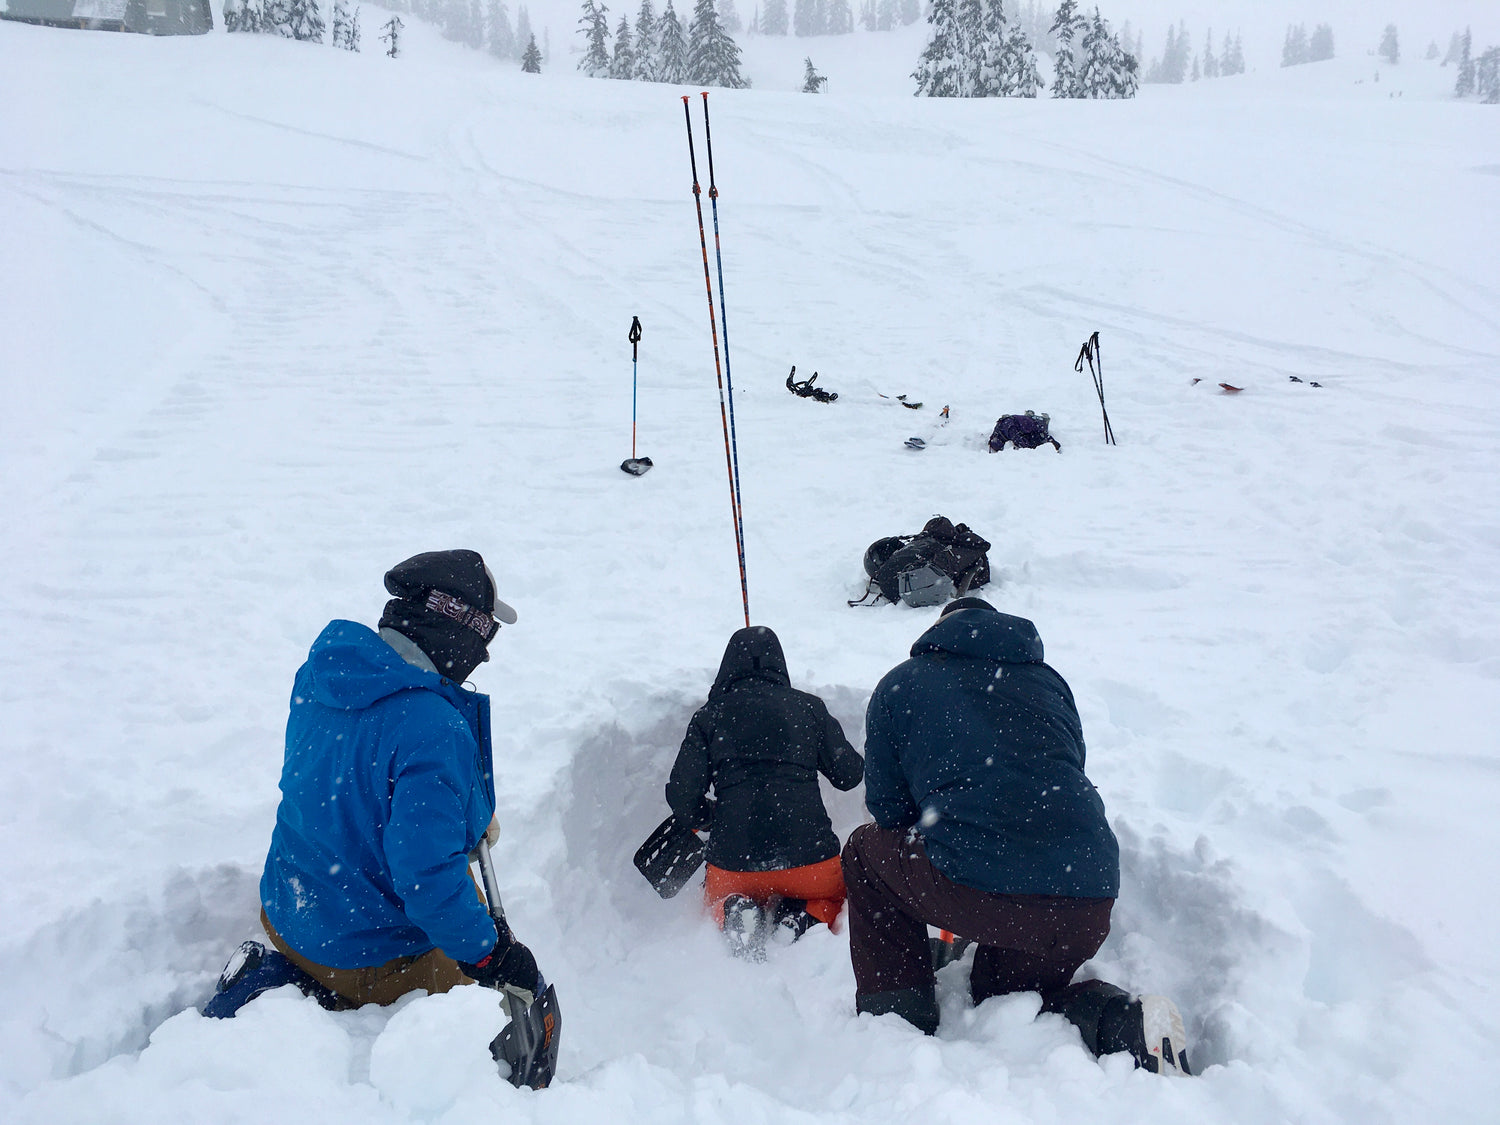 AIARE 1 students practice digging while performing an avalanche rescue. 